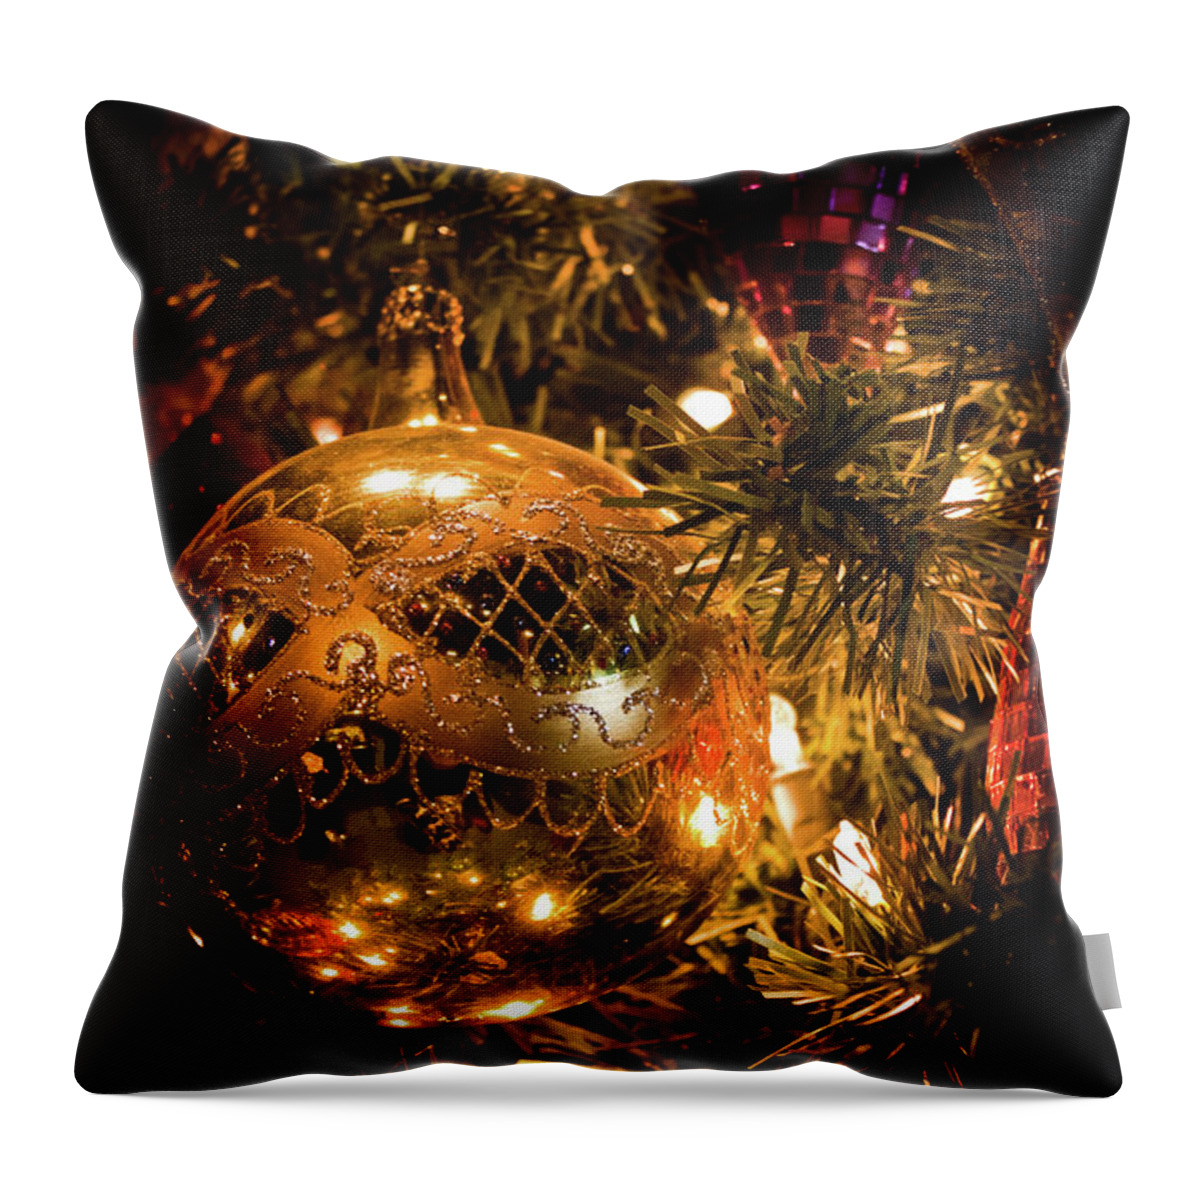 Purple Throw Pillow featuring the photograph Gold Christmas Ornament by Joann Copeland-Paul